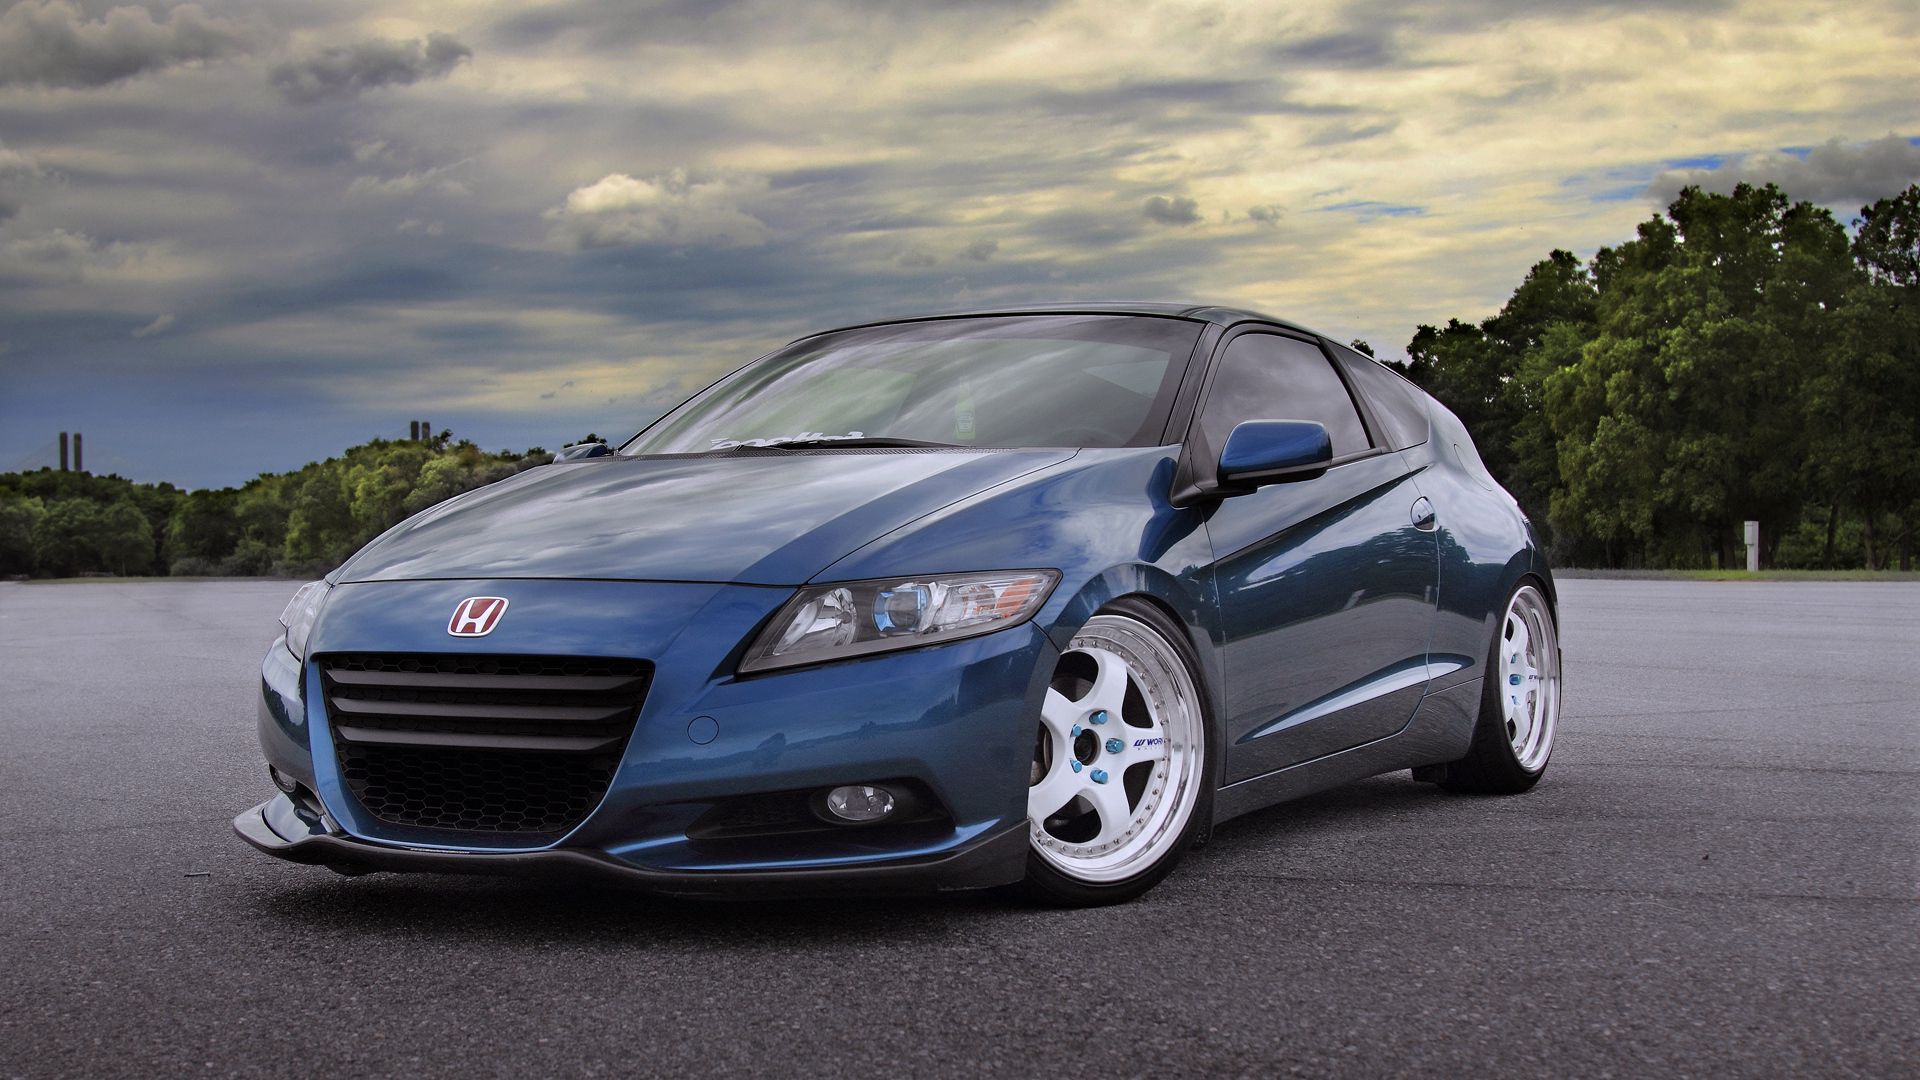 56742 download wallpaper honda, cars, side view, crz, wheels screensavers and pictures for free